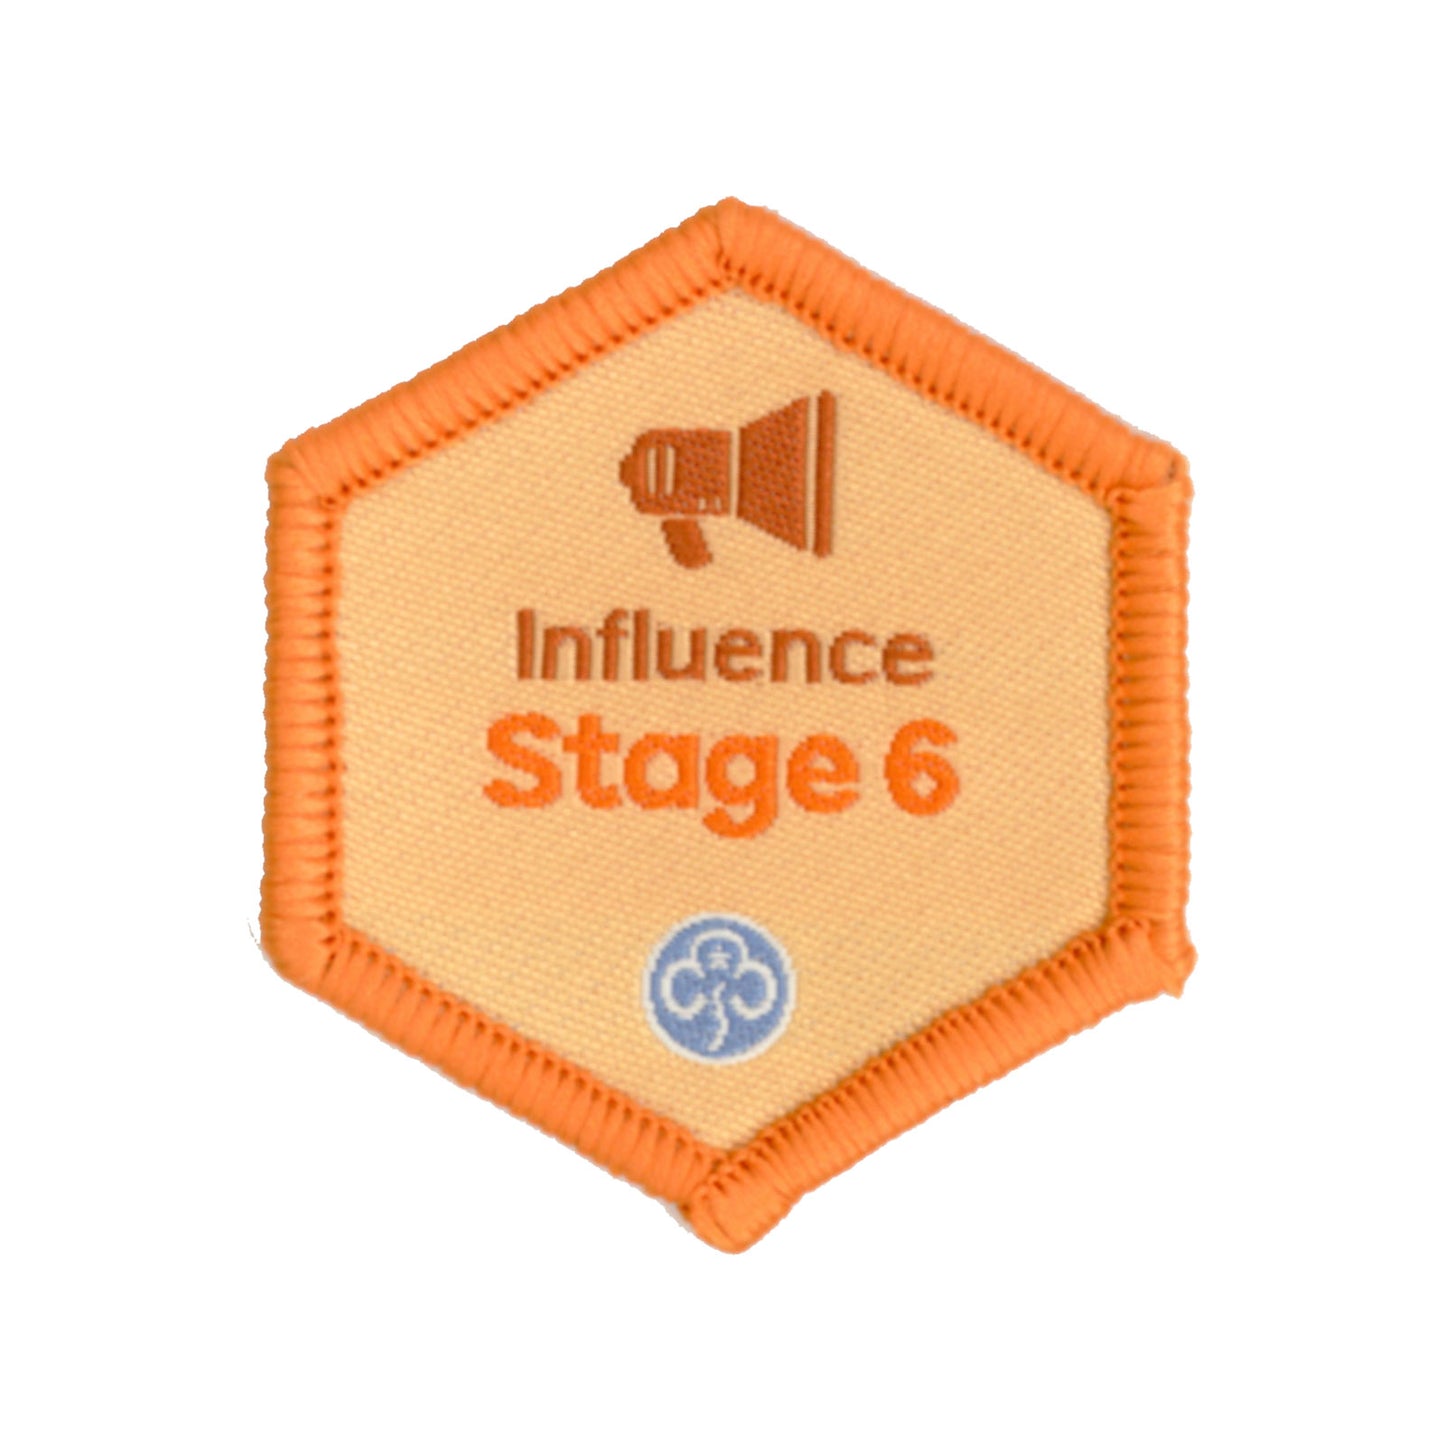 Skills Builder - Take Action - Influence Stage 6 Woven Badge